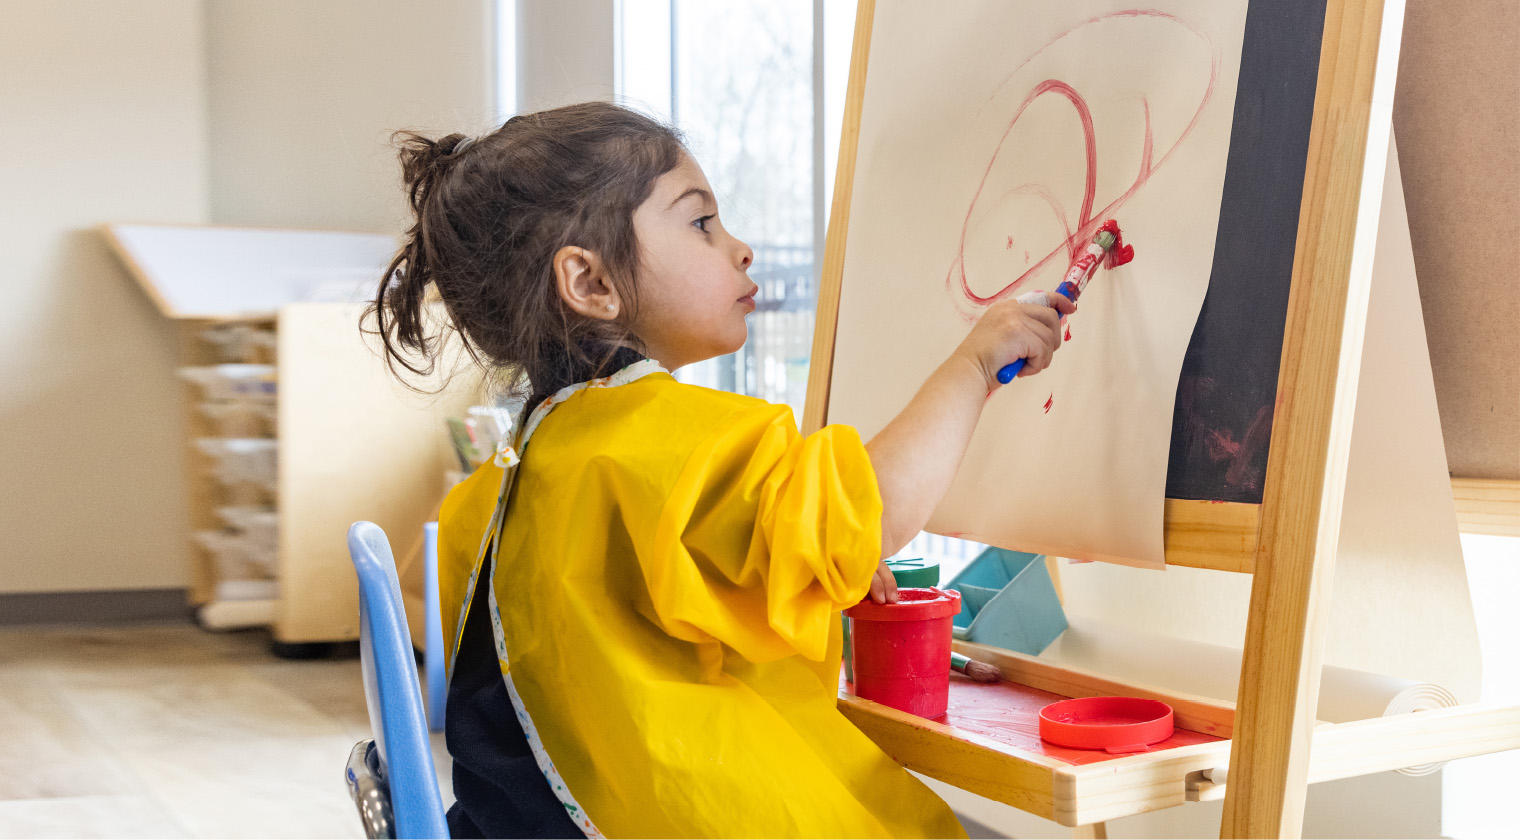 Little girl is seated by a classroom window at an art easel, wearing a bright yellow smock, painting in bright red